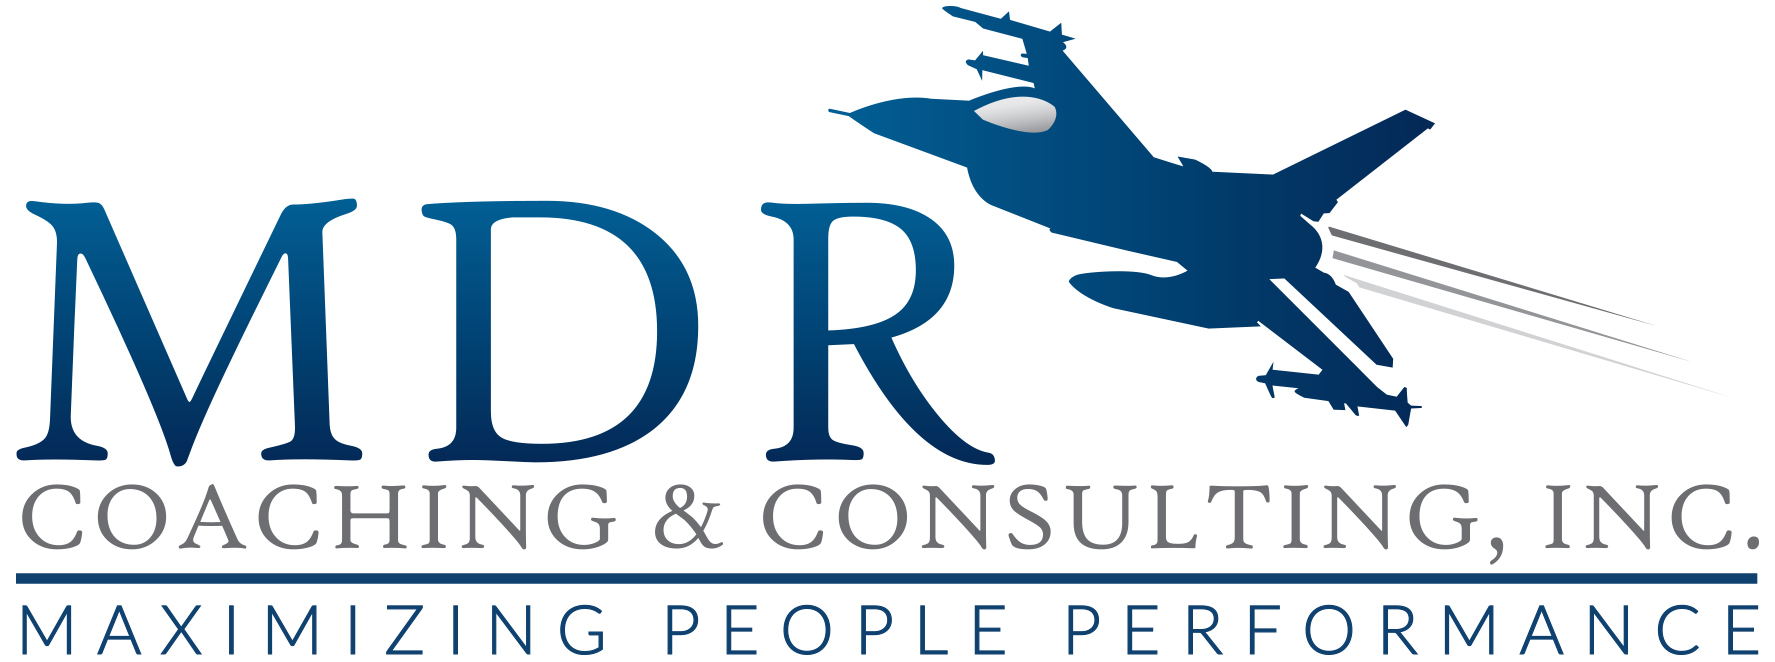 MDR Coaching & Consulting, Inc